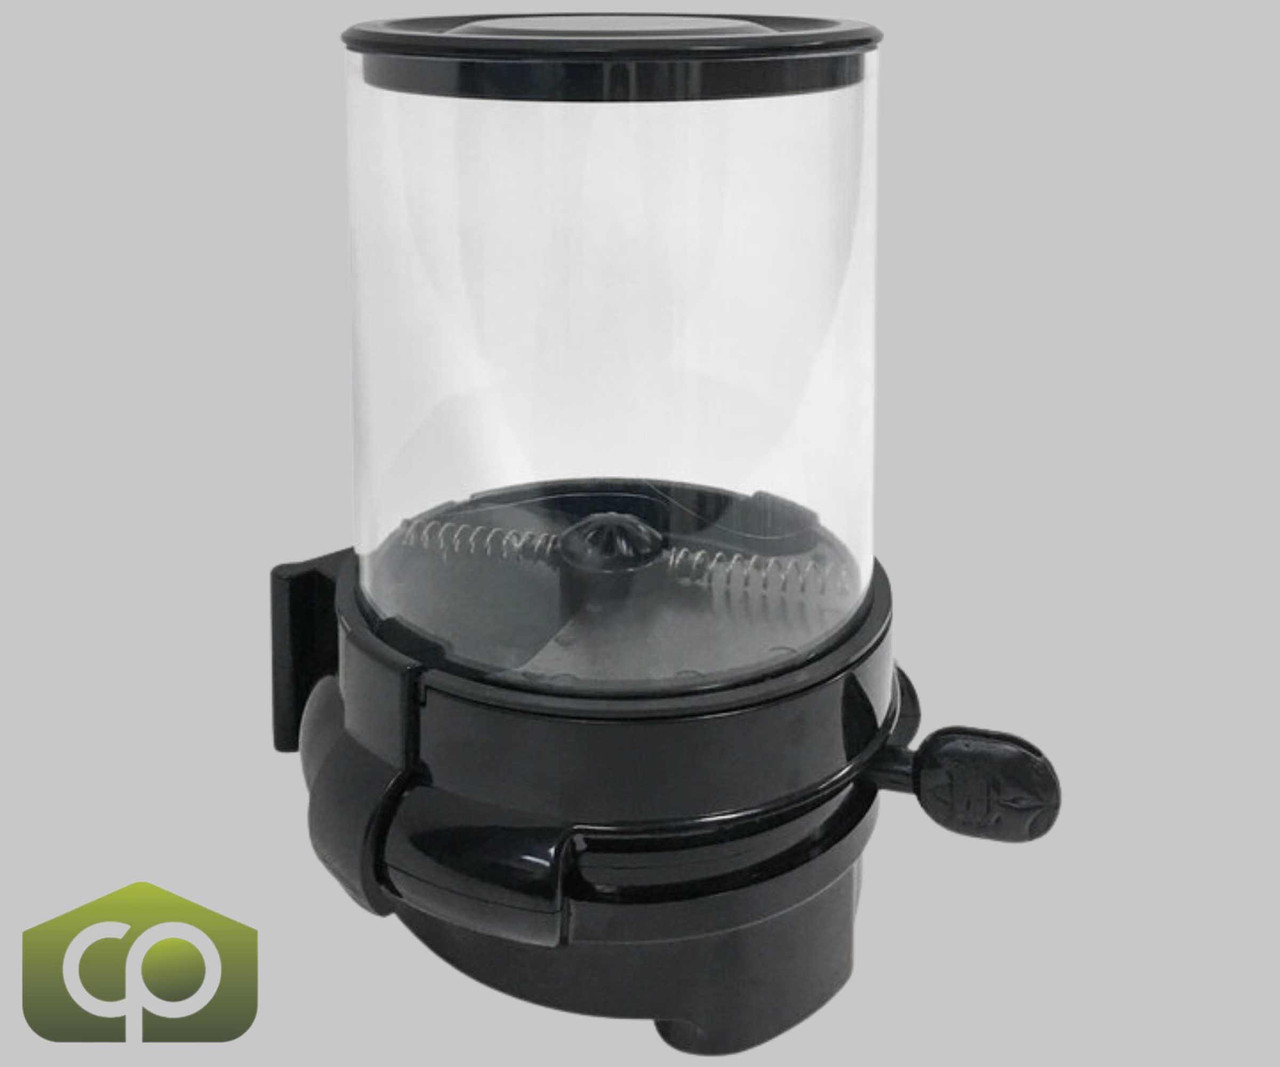 Cal-Mil Black Wall Mount 1.5 Liter Single Canister Powder Dispenser - Space-Saving Precision